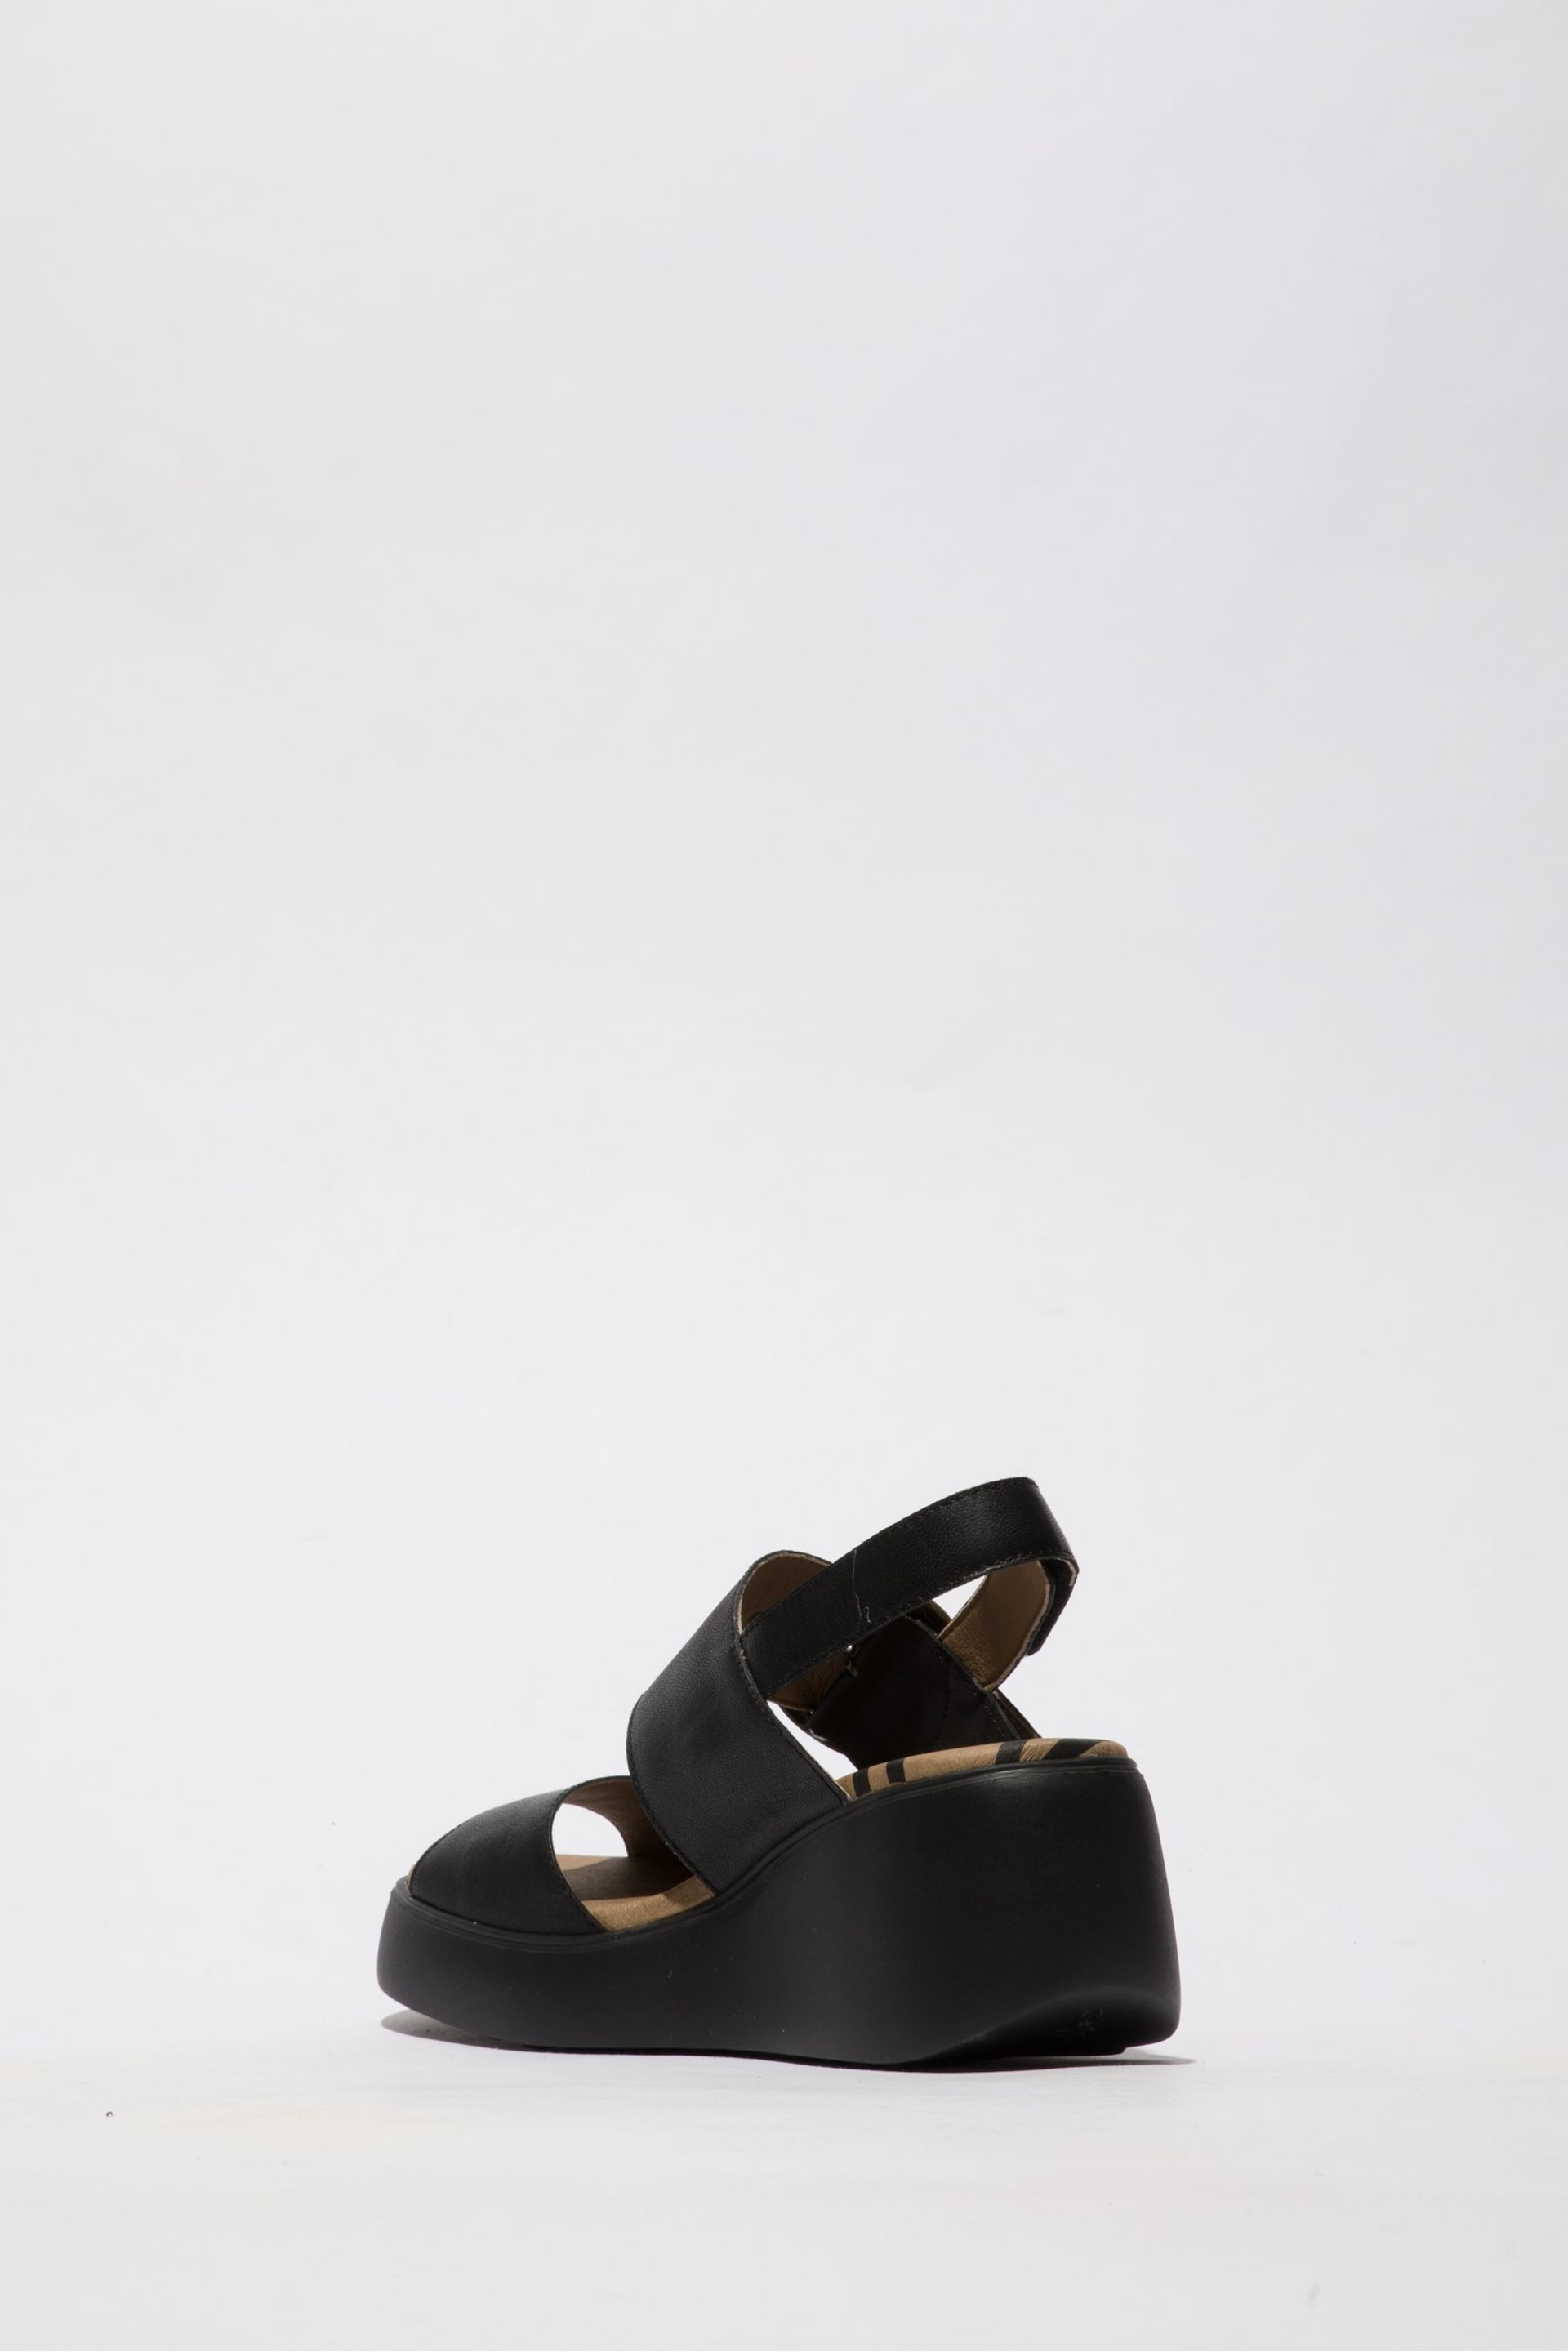 Fly London Digo Wedge Sandals - Image 2 of 4